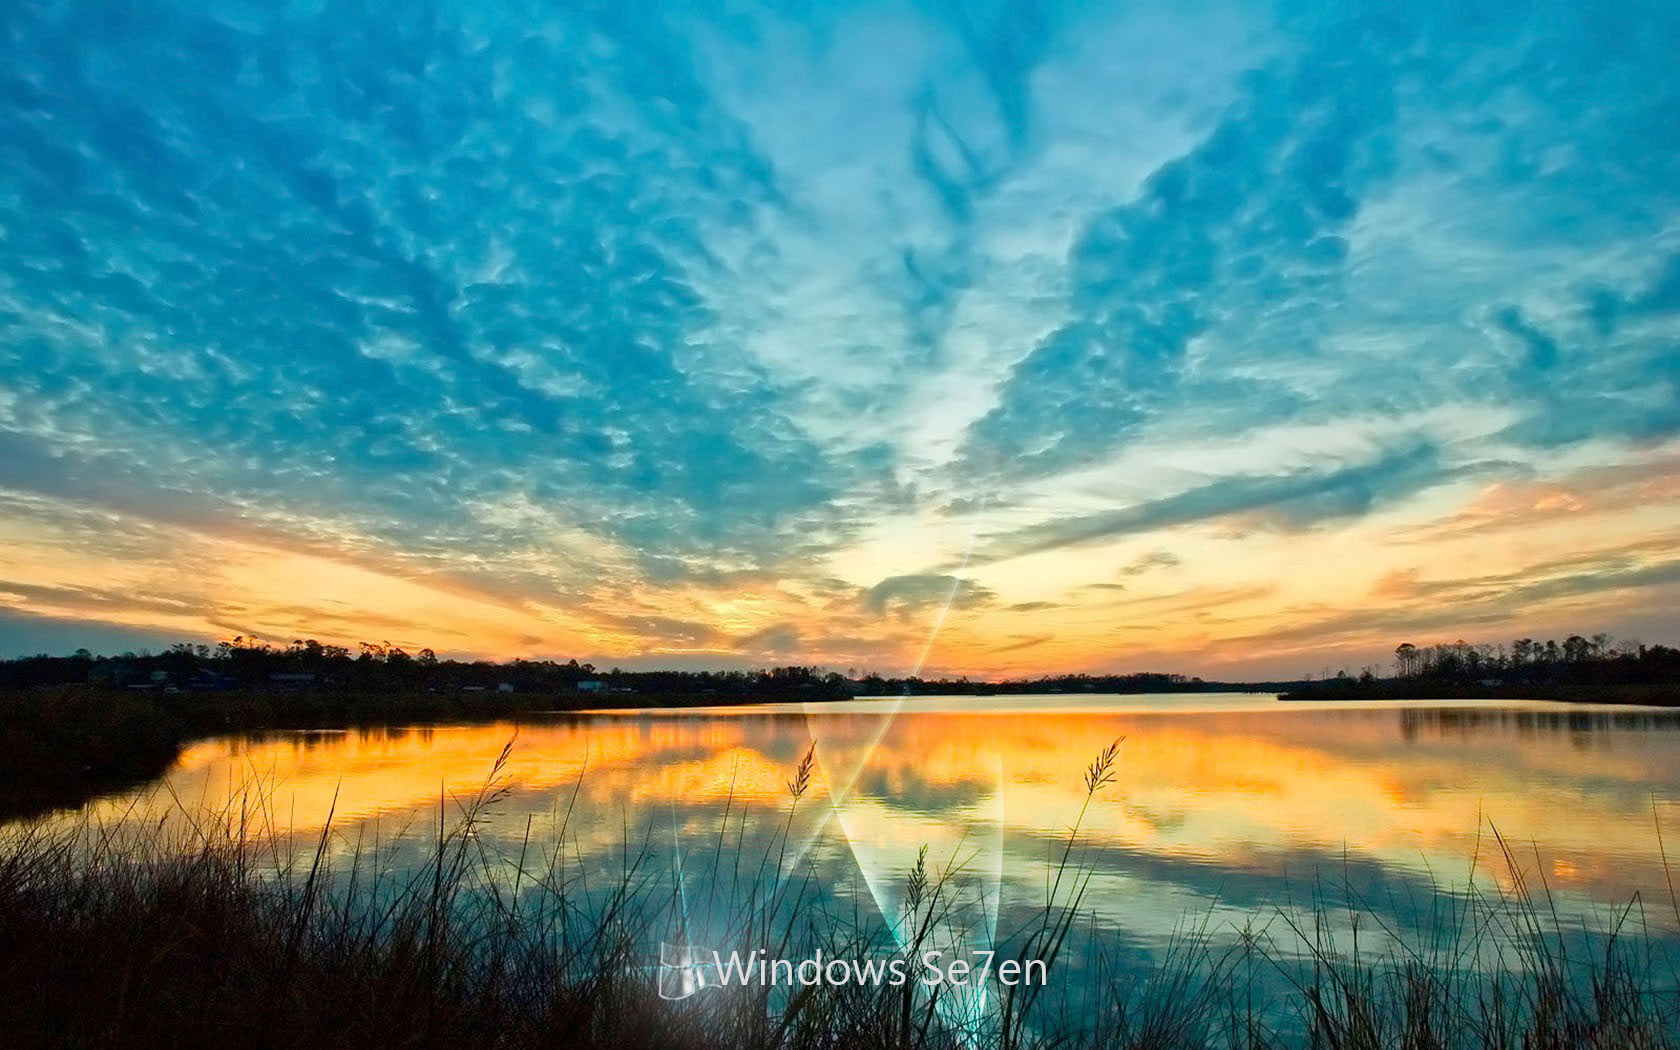  Laptop Hd Wallpapers for Windows 7 Ultimate Laptop Nature Widescreen